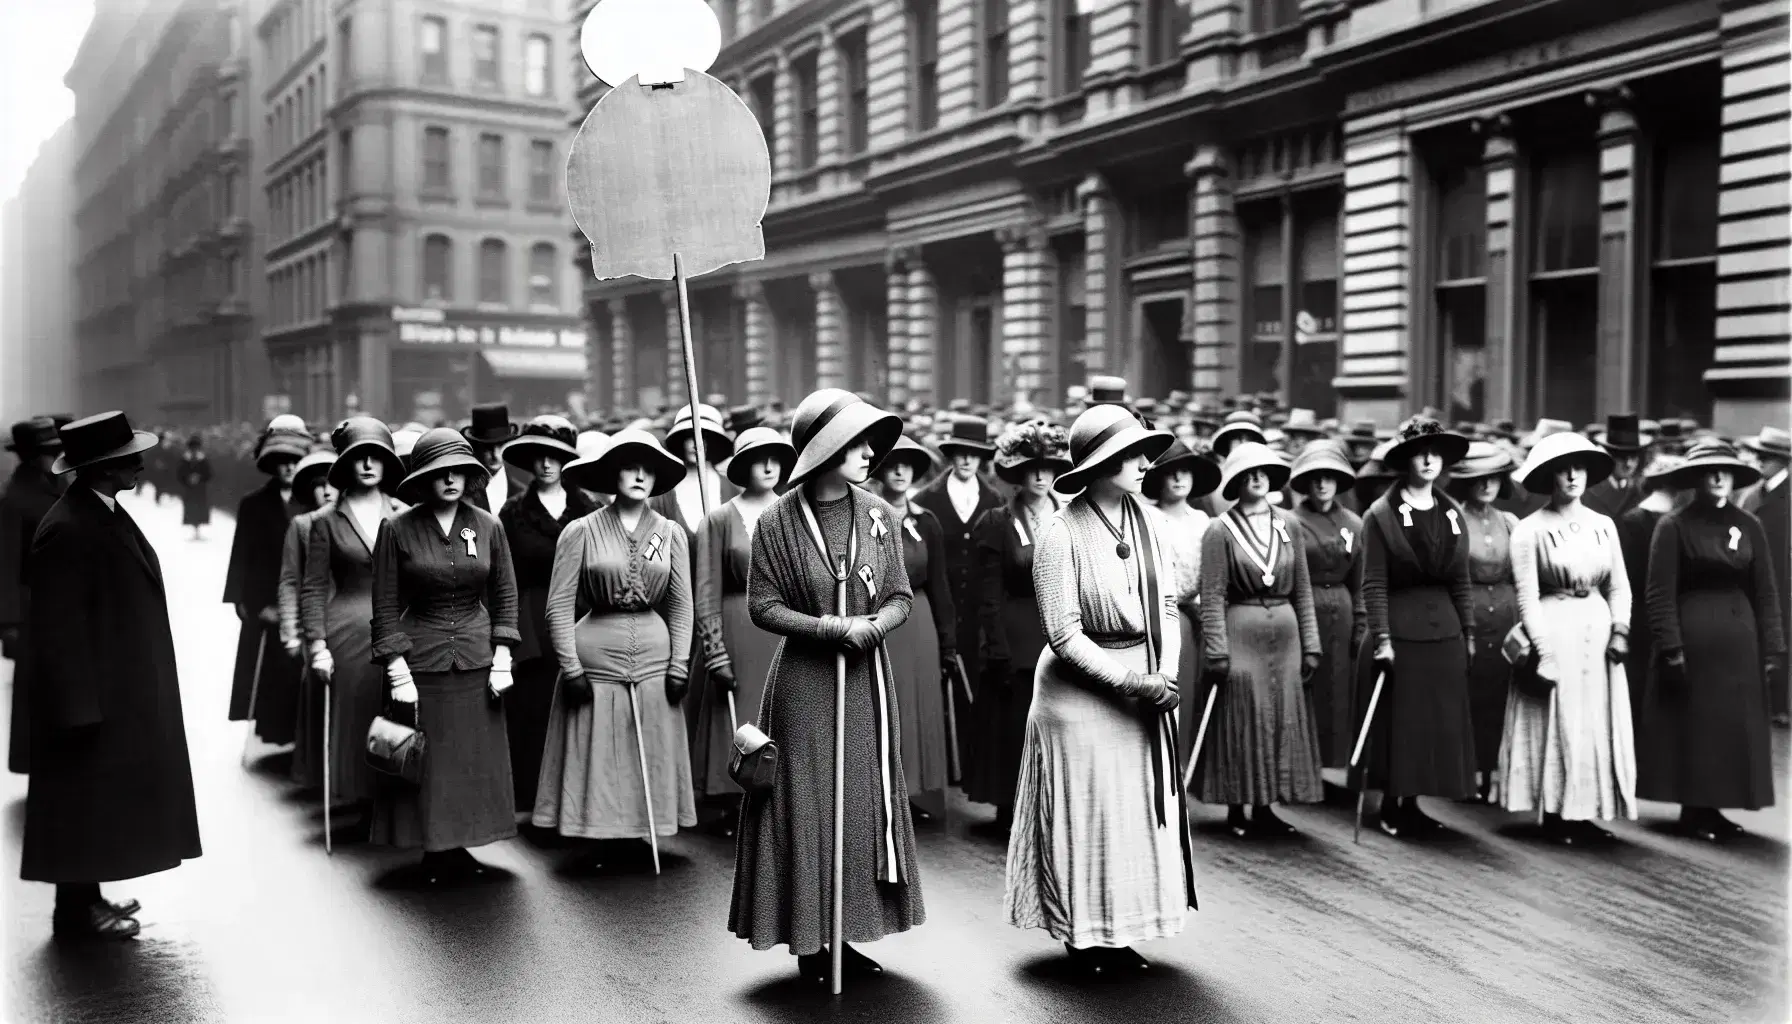 1920s suffrage parade with women in period attire, cloche hats, and knee-length dresses, holding blank placards on a city street.